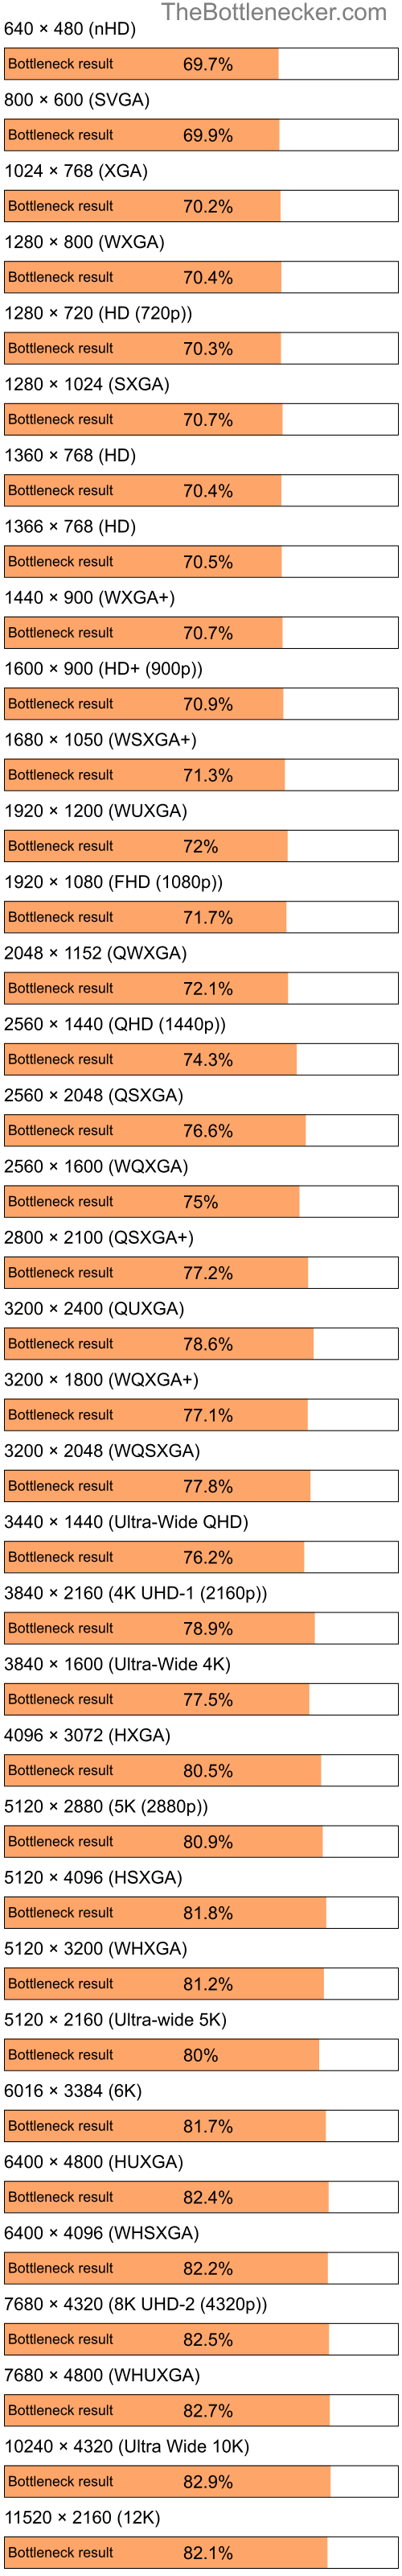 Bottleneck results by resolution for Intel Atom Z520 and AMD Mobility Radeon HD 4225 in7 Days to Die